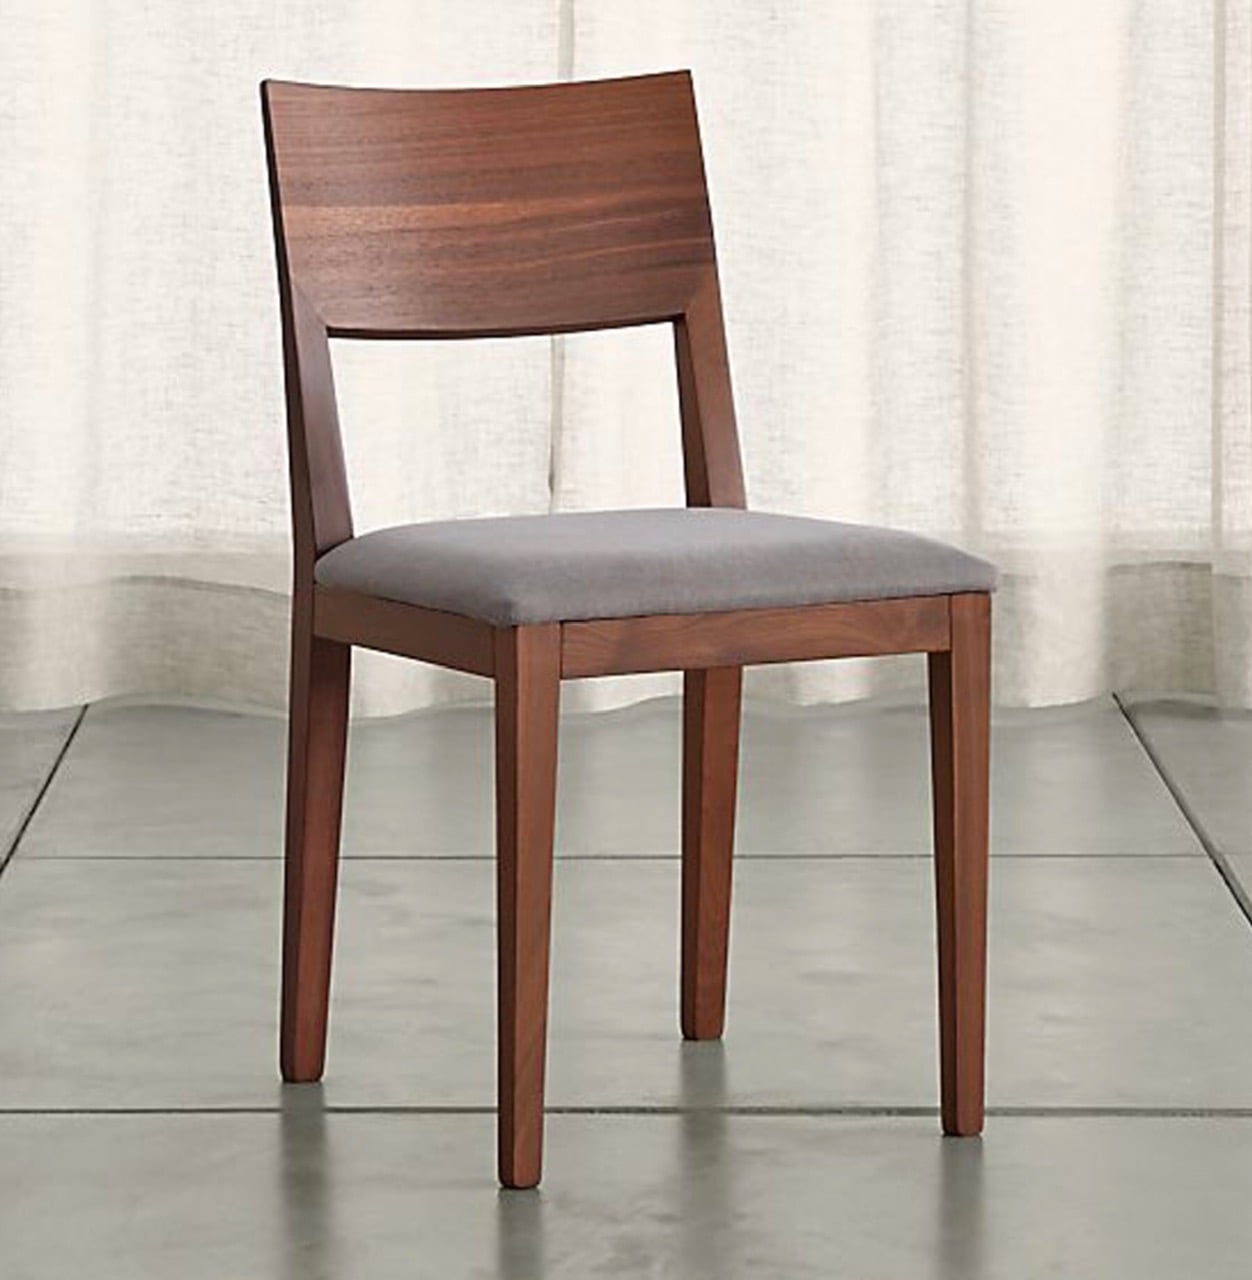 Made to Order Kitchen Furniture. - Dining Chairs 020-01